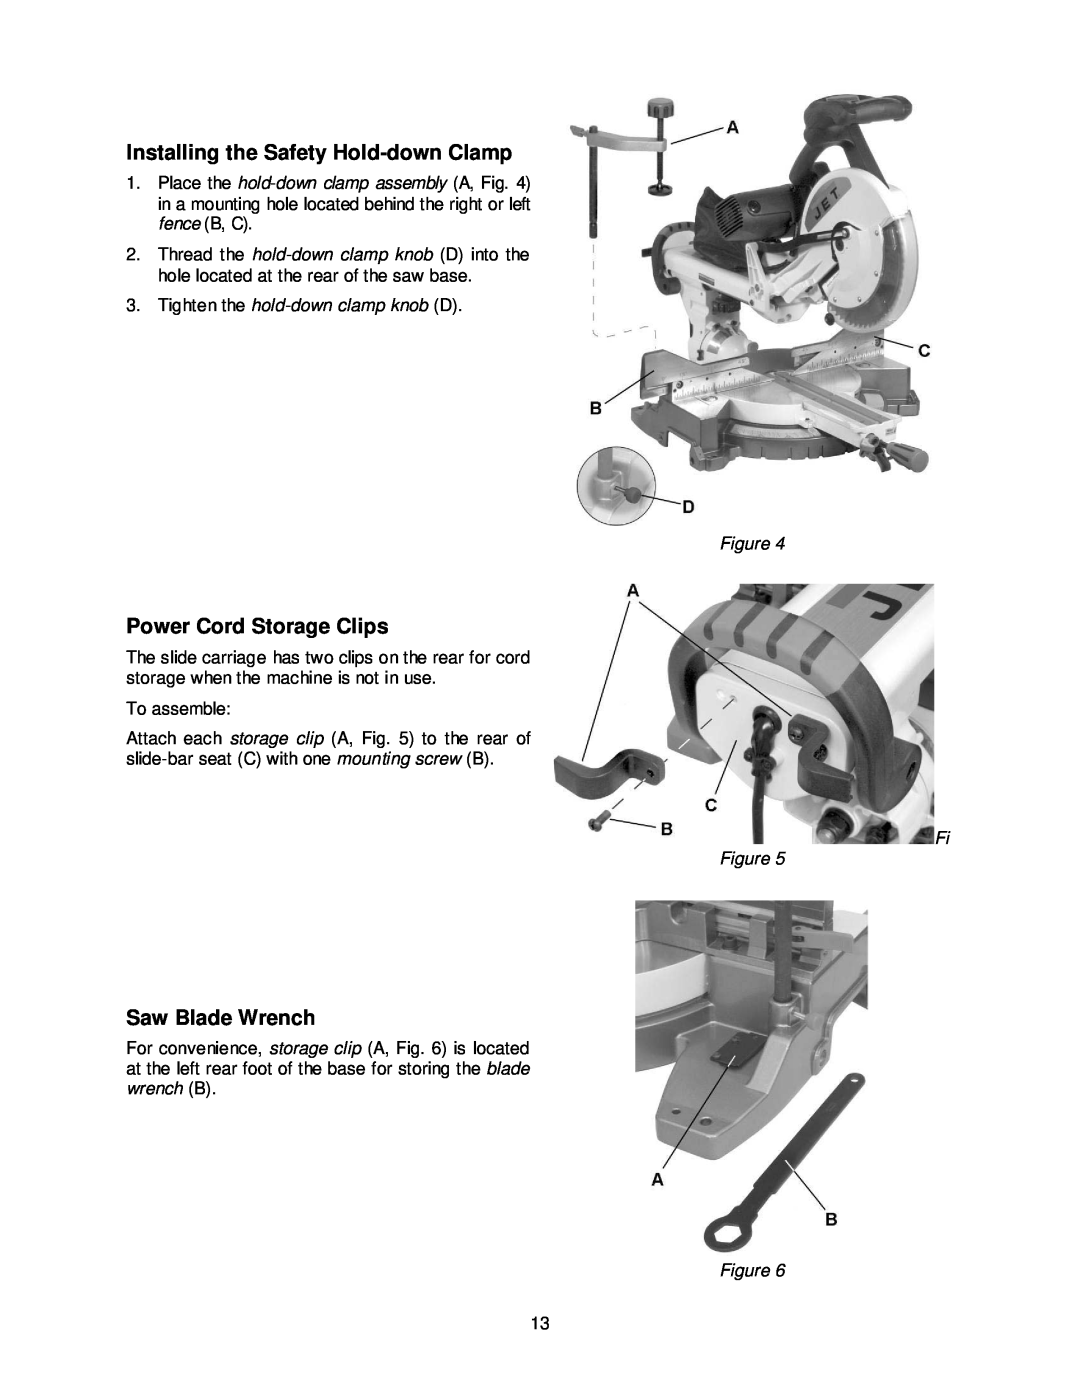 Jet Tools JMS-12SCMS manual Installing the Safety Hold-down Clamp, Power Cord Storage Clips, Saw Blade Wrench 